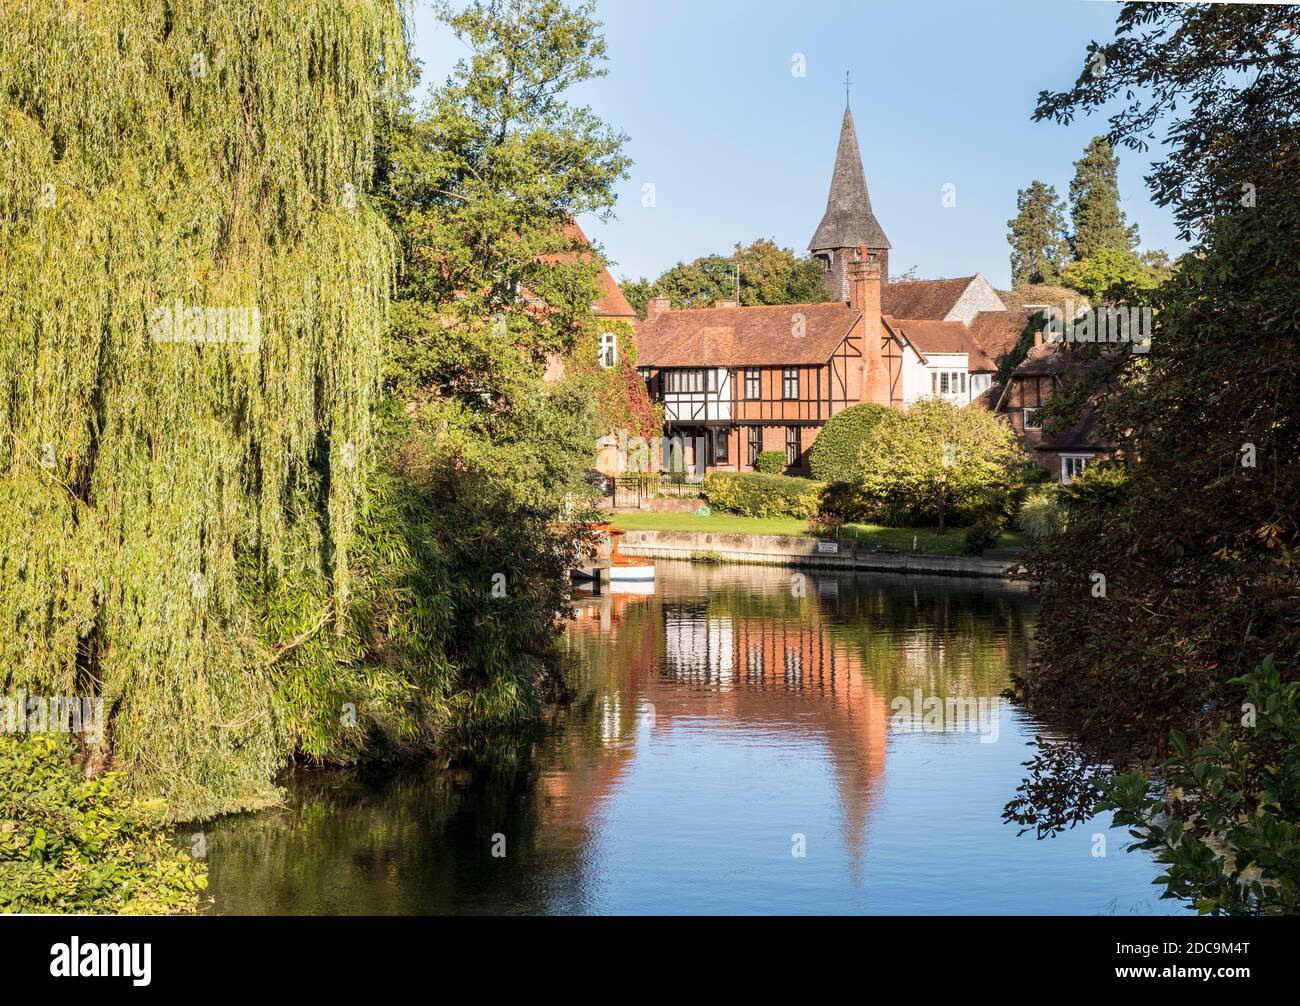 The Mill Pool, Whitchurch, Berkshire, South East England, GB, UK Stock Photo